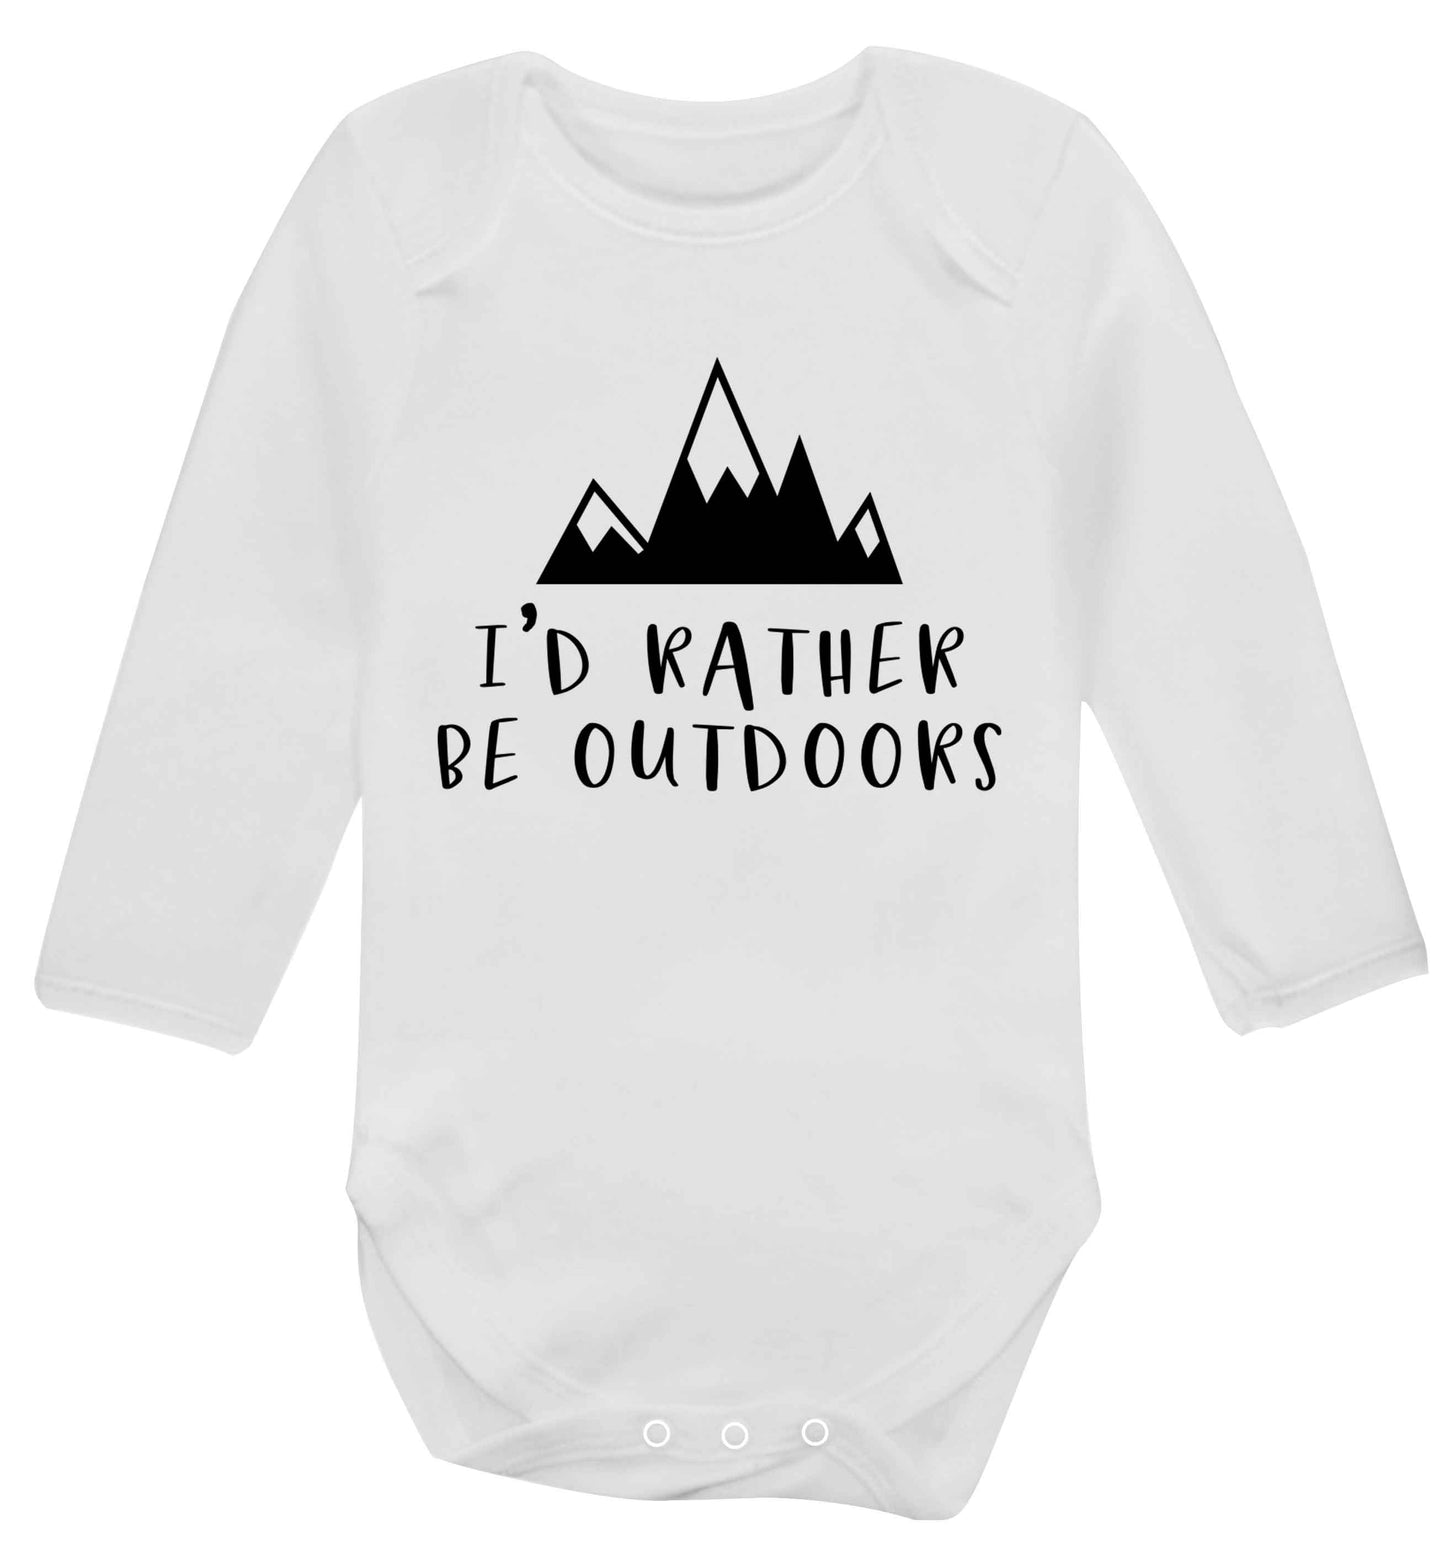 I'd rather be outdoors Baby Vest long sleeved white 6-12 months